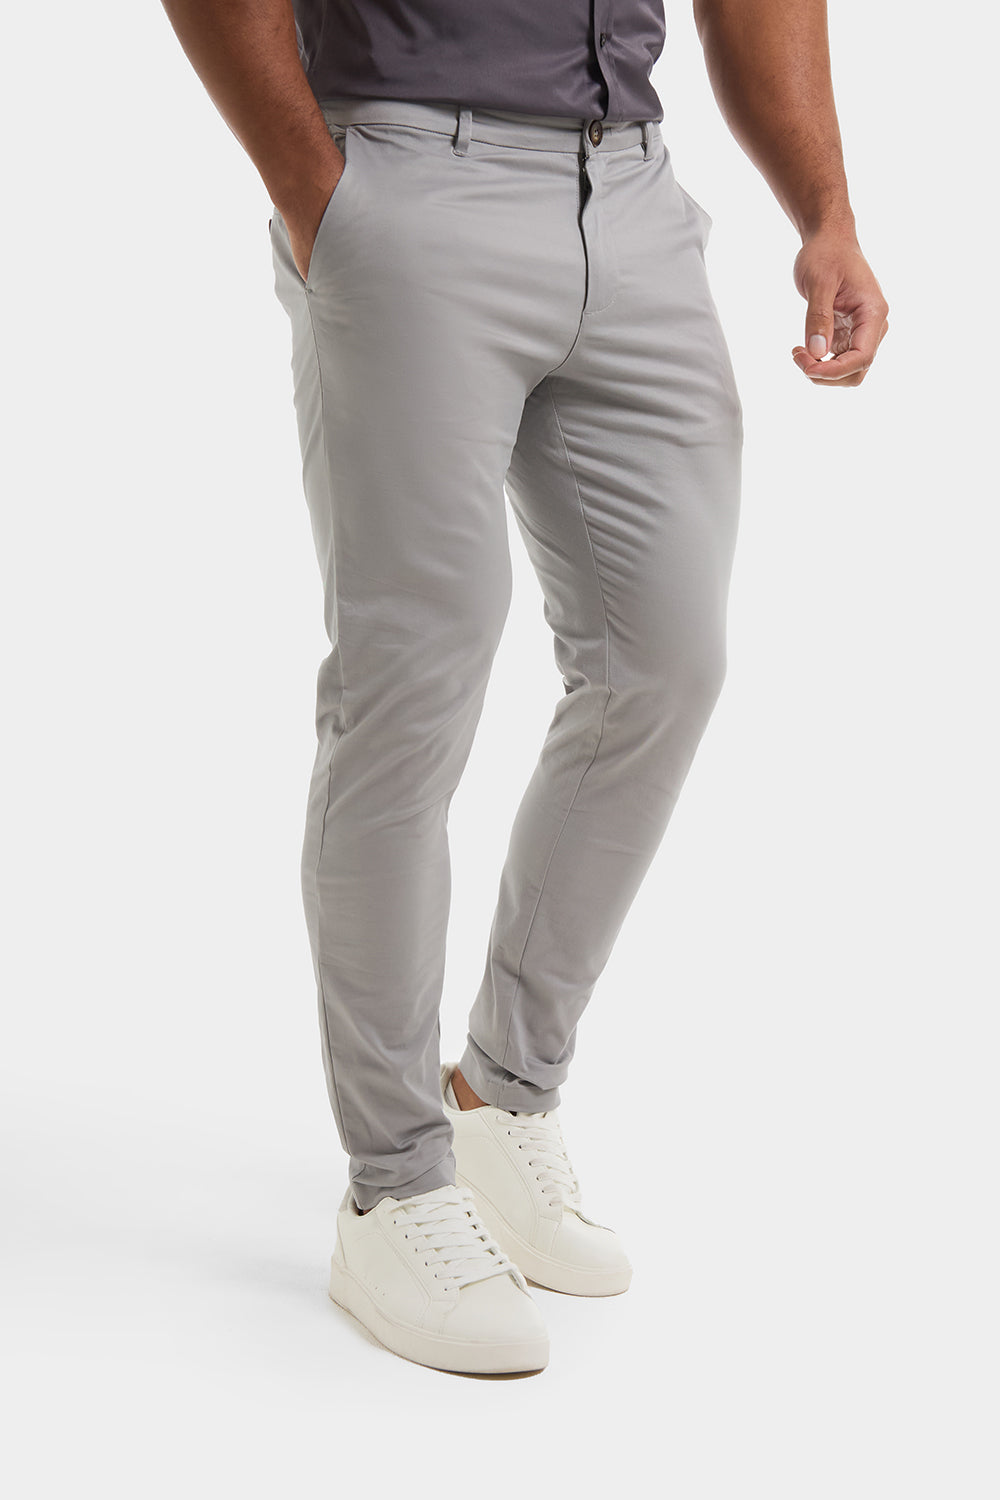 Muscle Fit Chino Trouser in Pale Grey - TAILORED ATHLETE - ROW